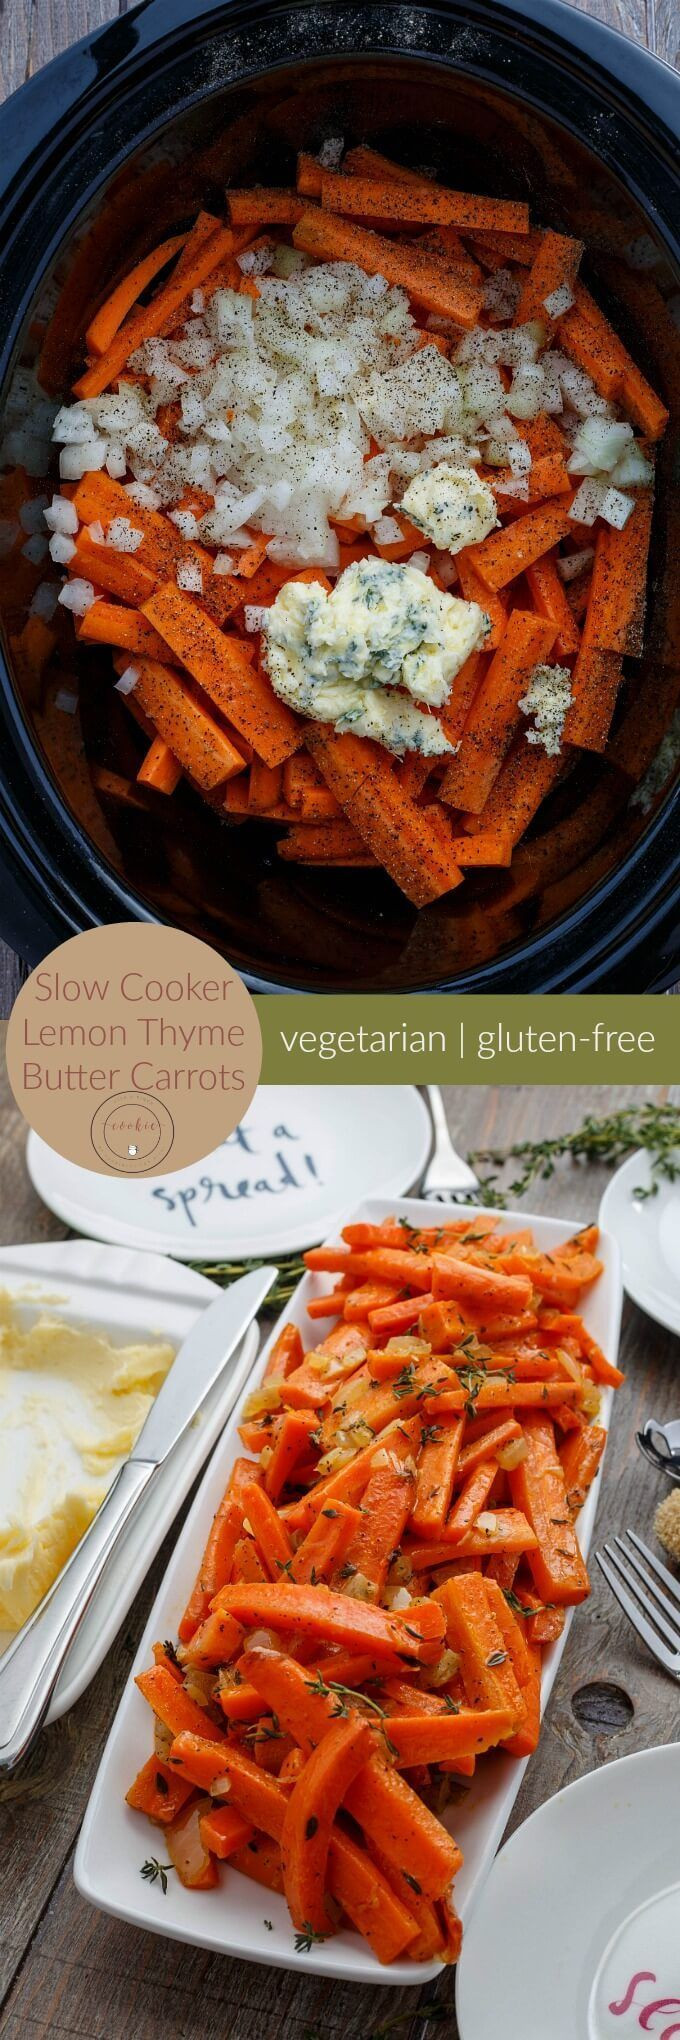 Thanksgiving Carrot Side Dishes
 1000 ideas about Carrots Side Dish on Pinterest